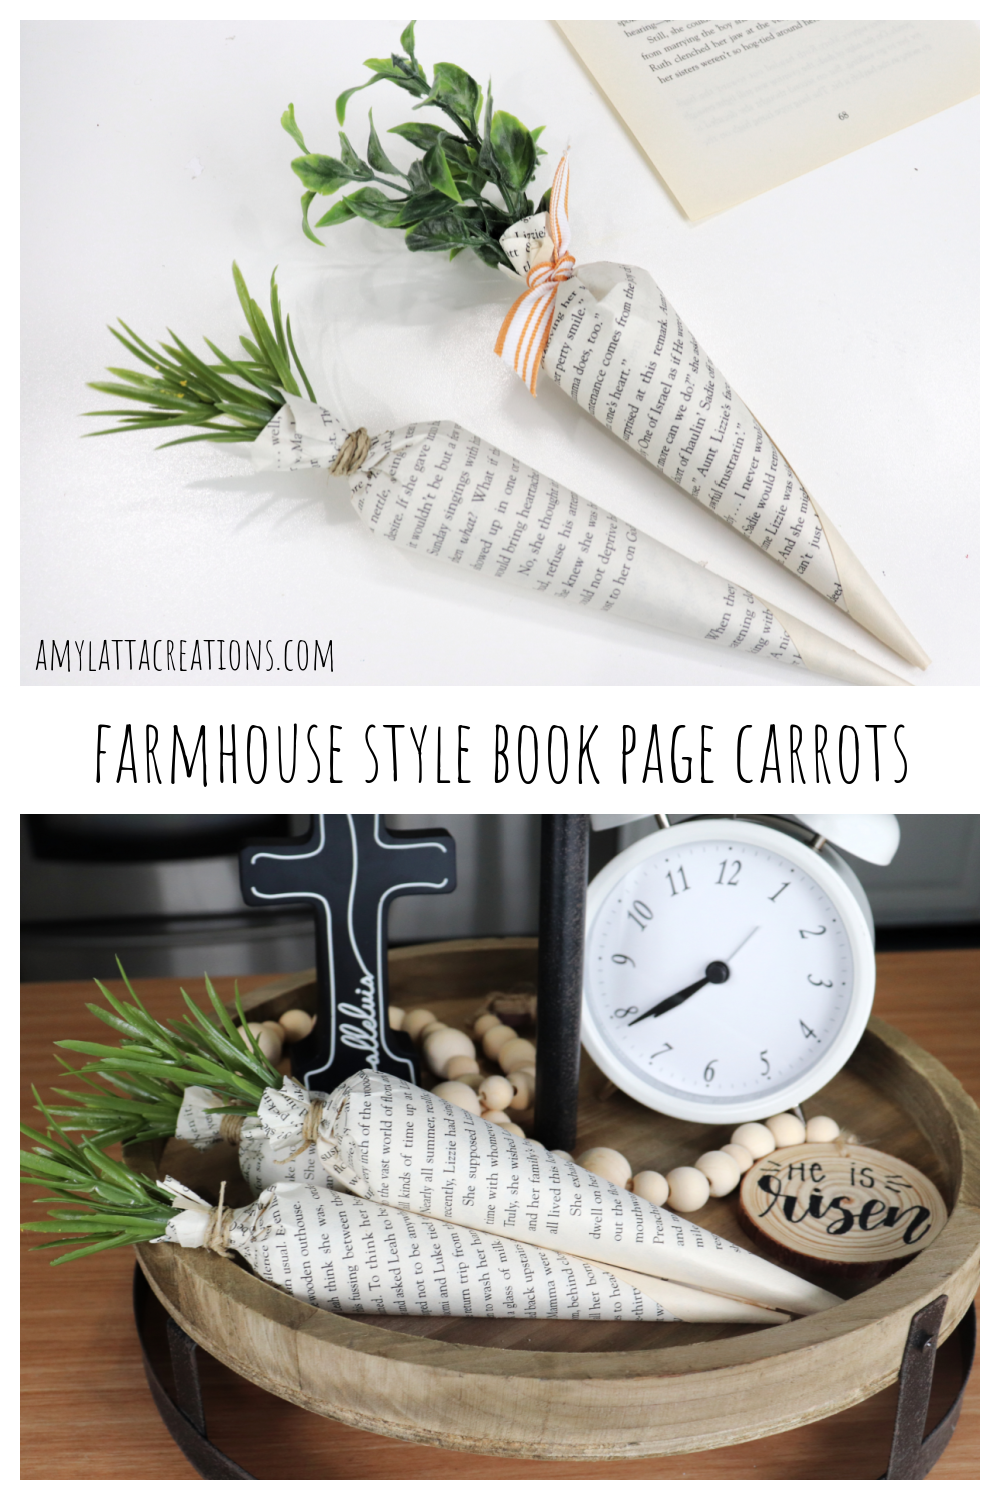 Image is a collage of photos featuring book page carrots.